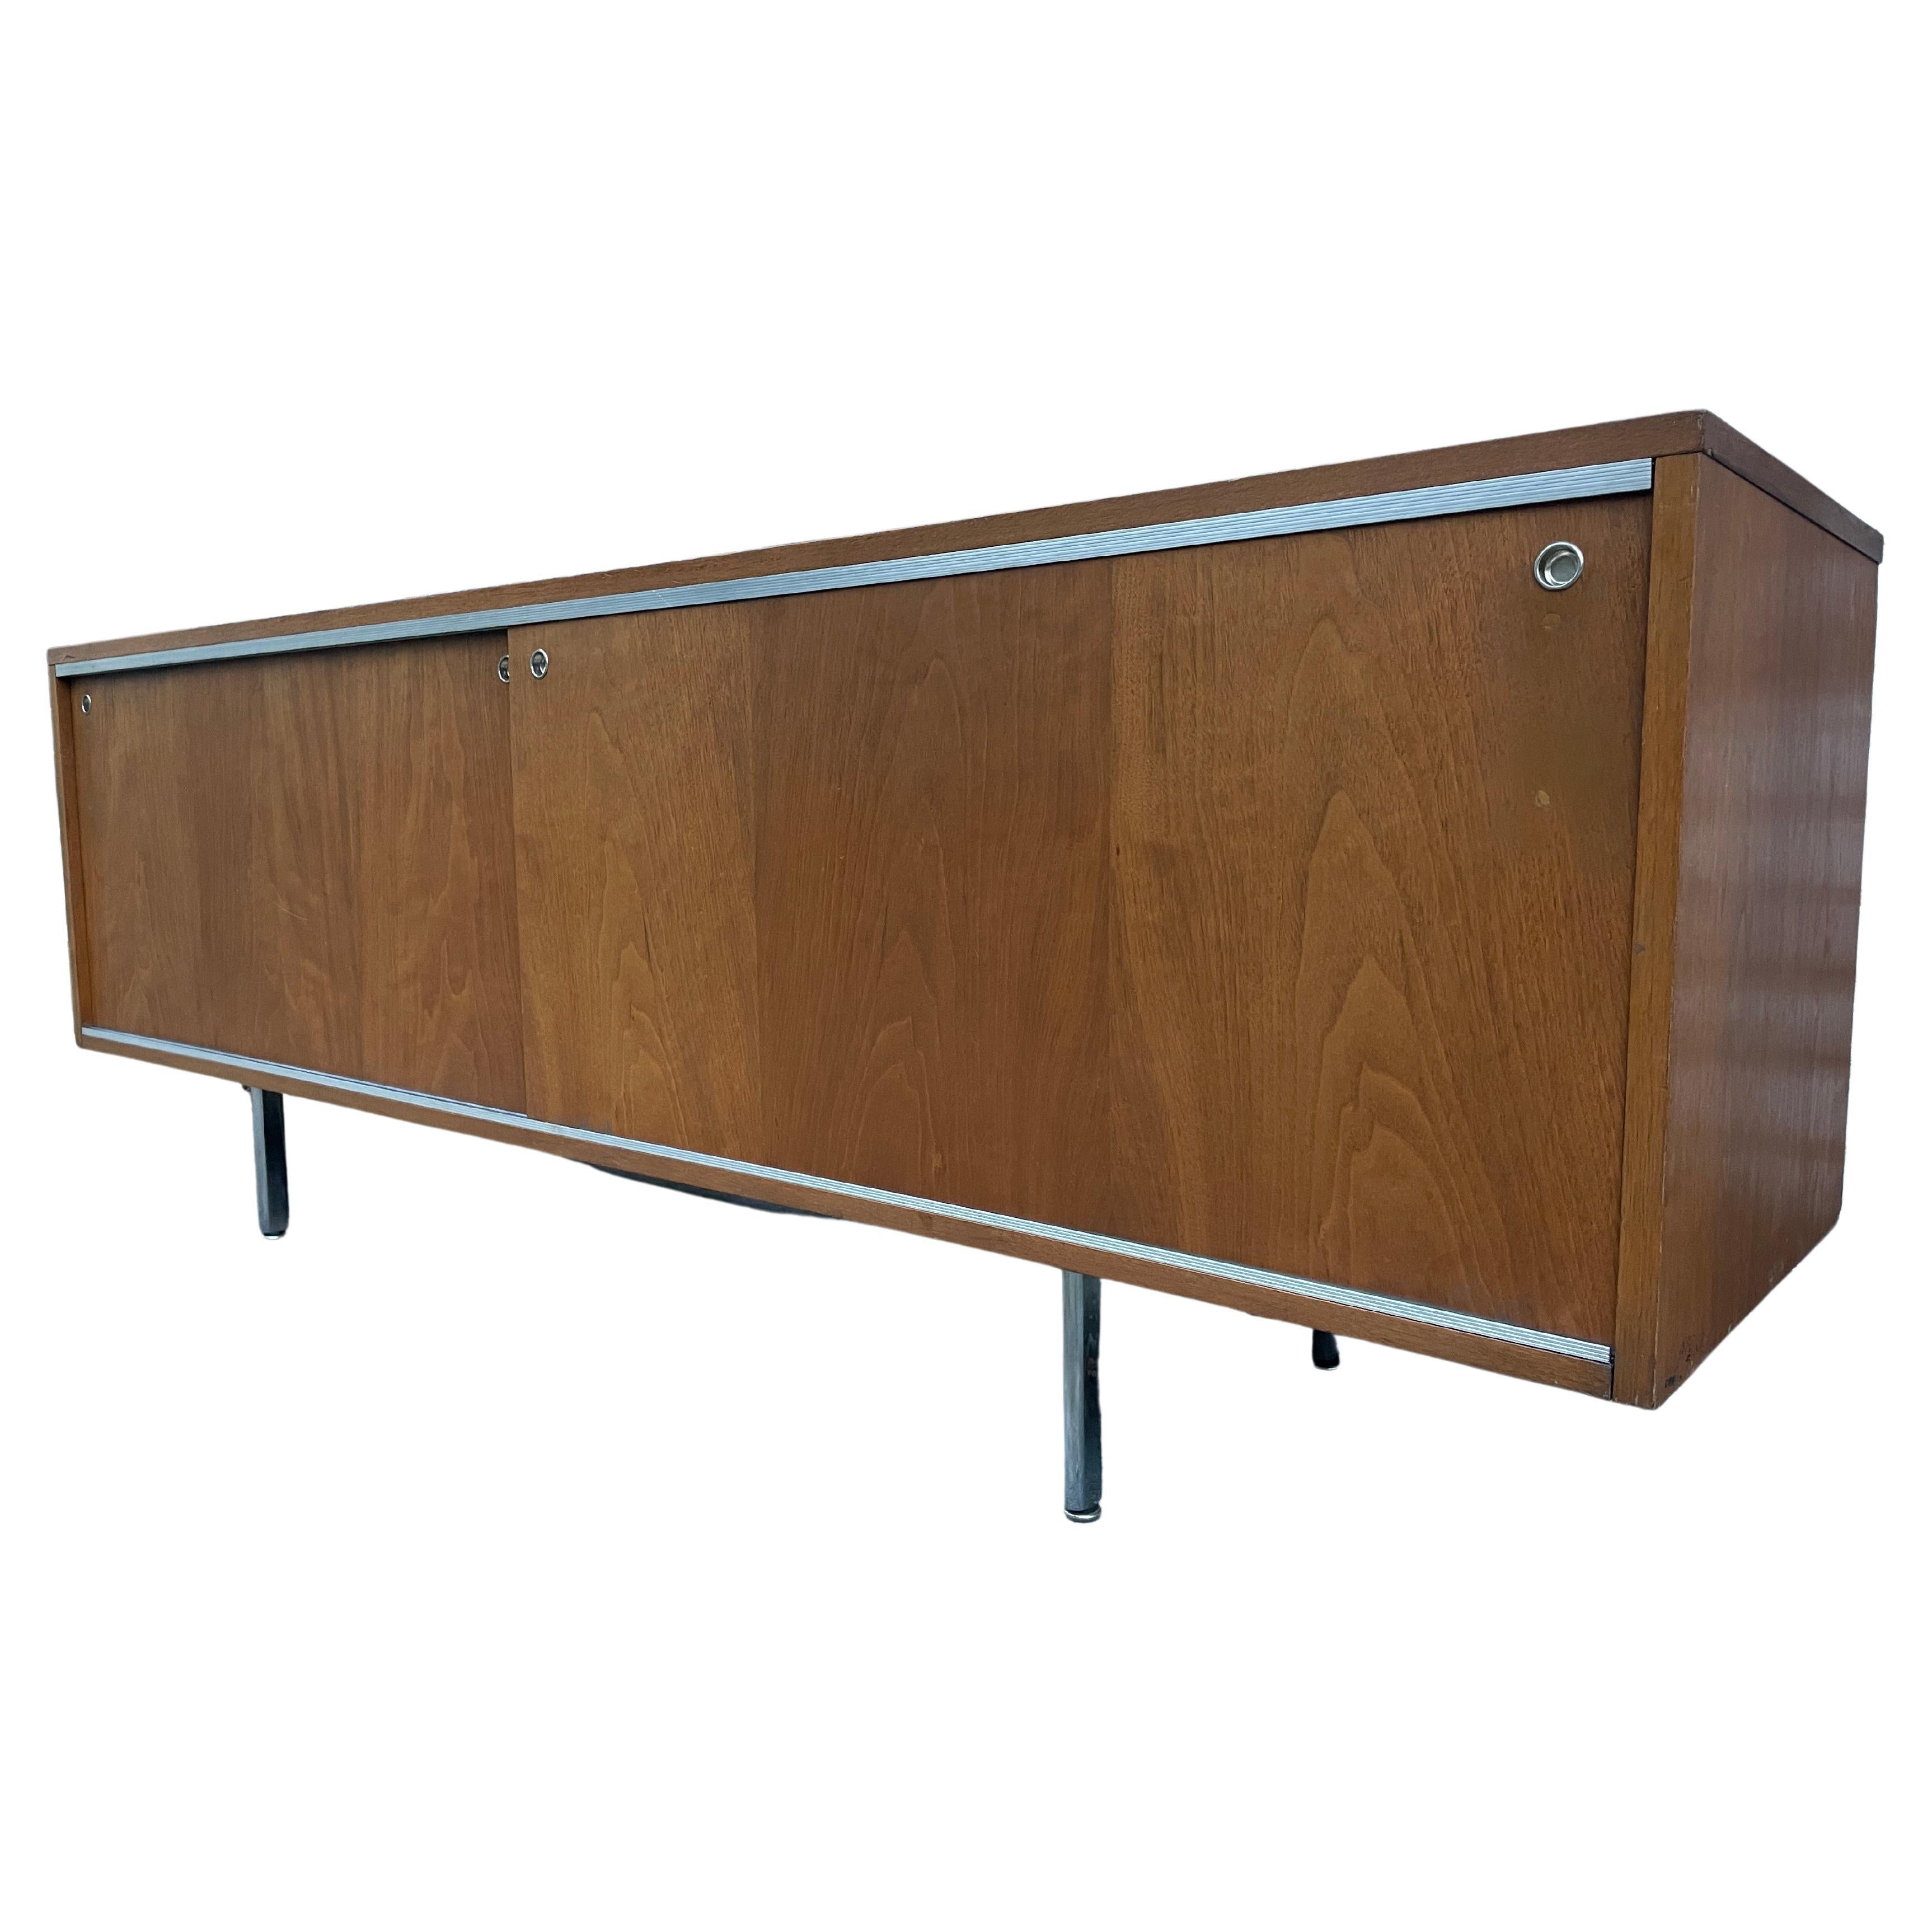 Wonderful low cabinet by Herman Miller designed by George Nelson. This beautiful brown walnut long low credenza features 2x front original walnut sliding doors with 2 sections inside and (1) adjustable shelf in each side. Sits on original chrome